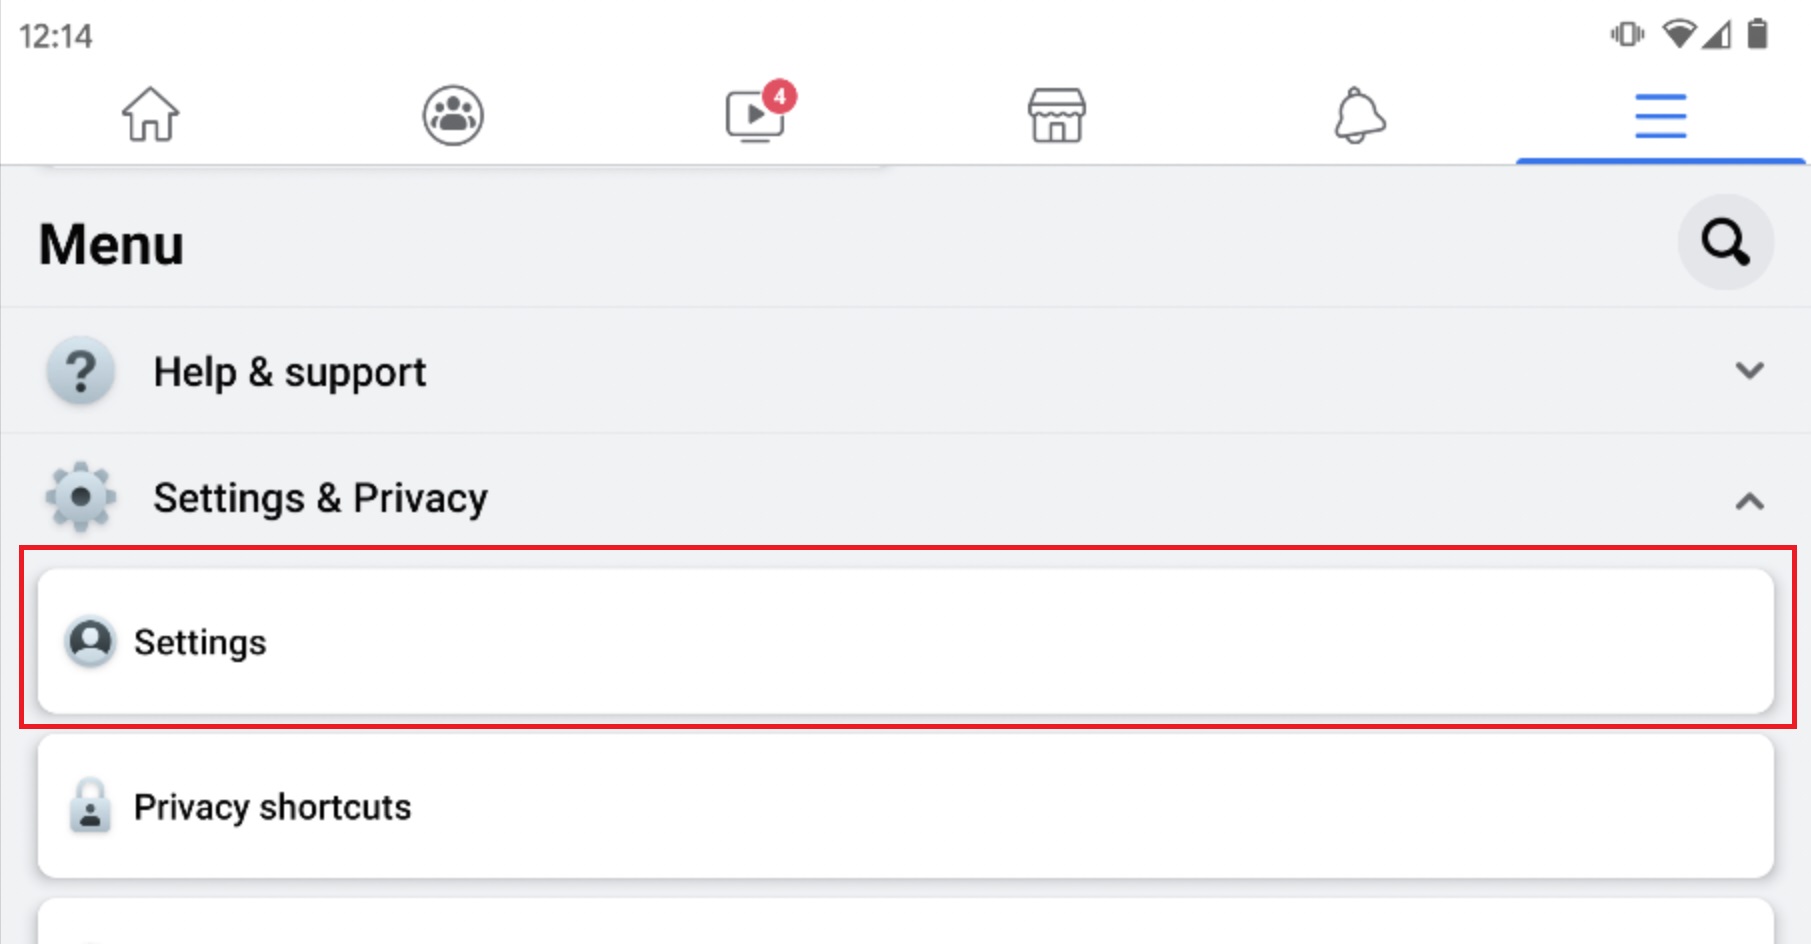 How to change the password on the Facebook app: Open Settings